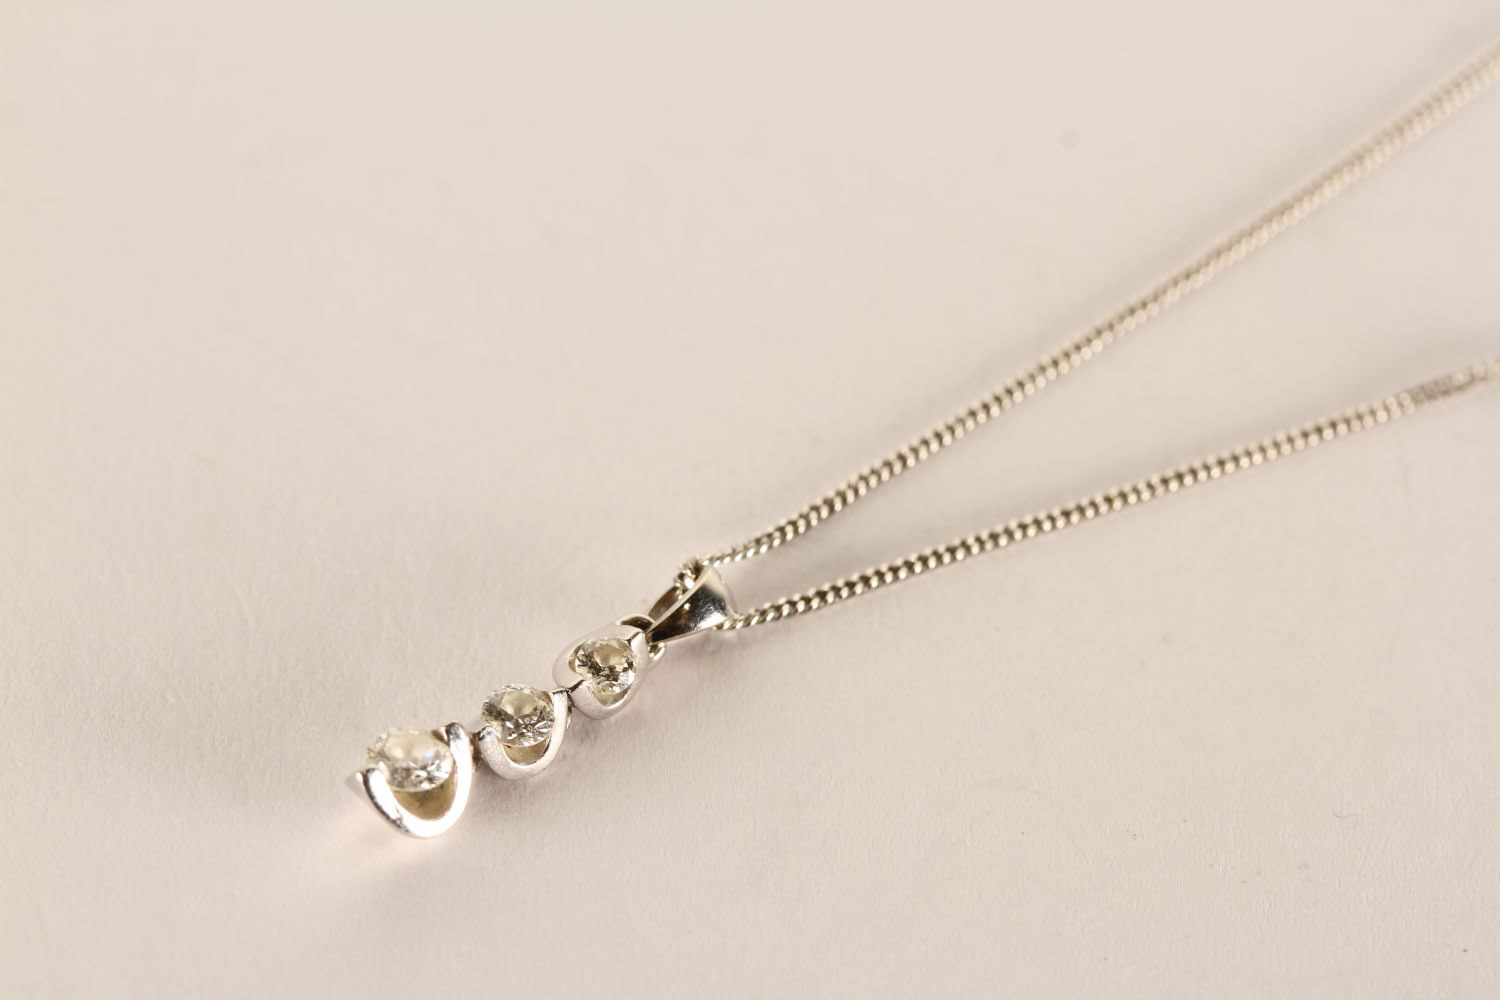 Diamond Trilogy Necklace, set with 3 diamonds, stamped 18ct white gold, approximate chain length - Image 2 of 3